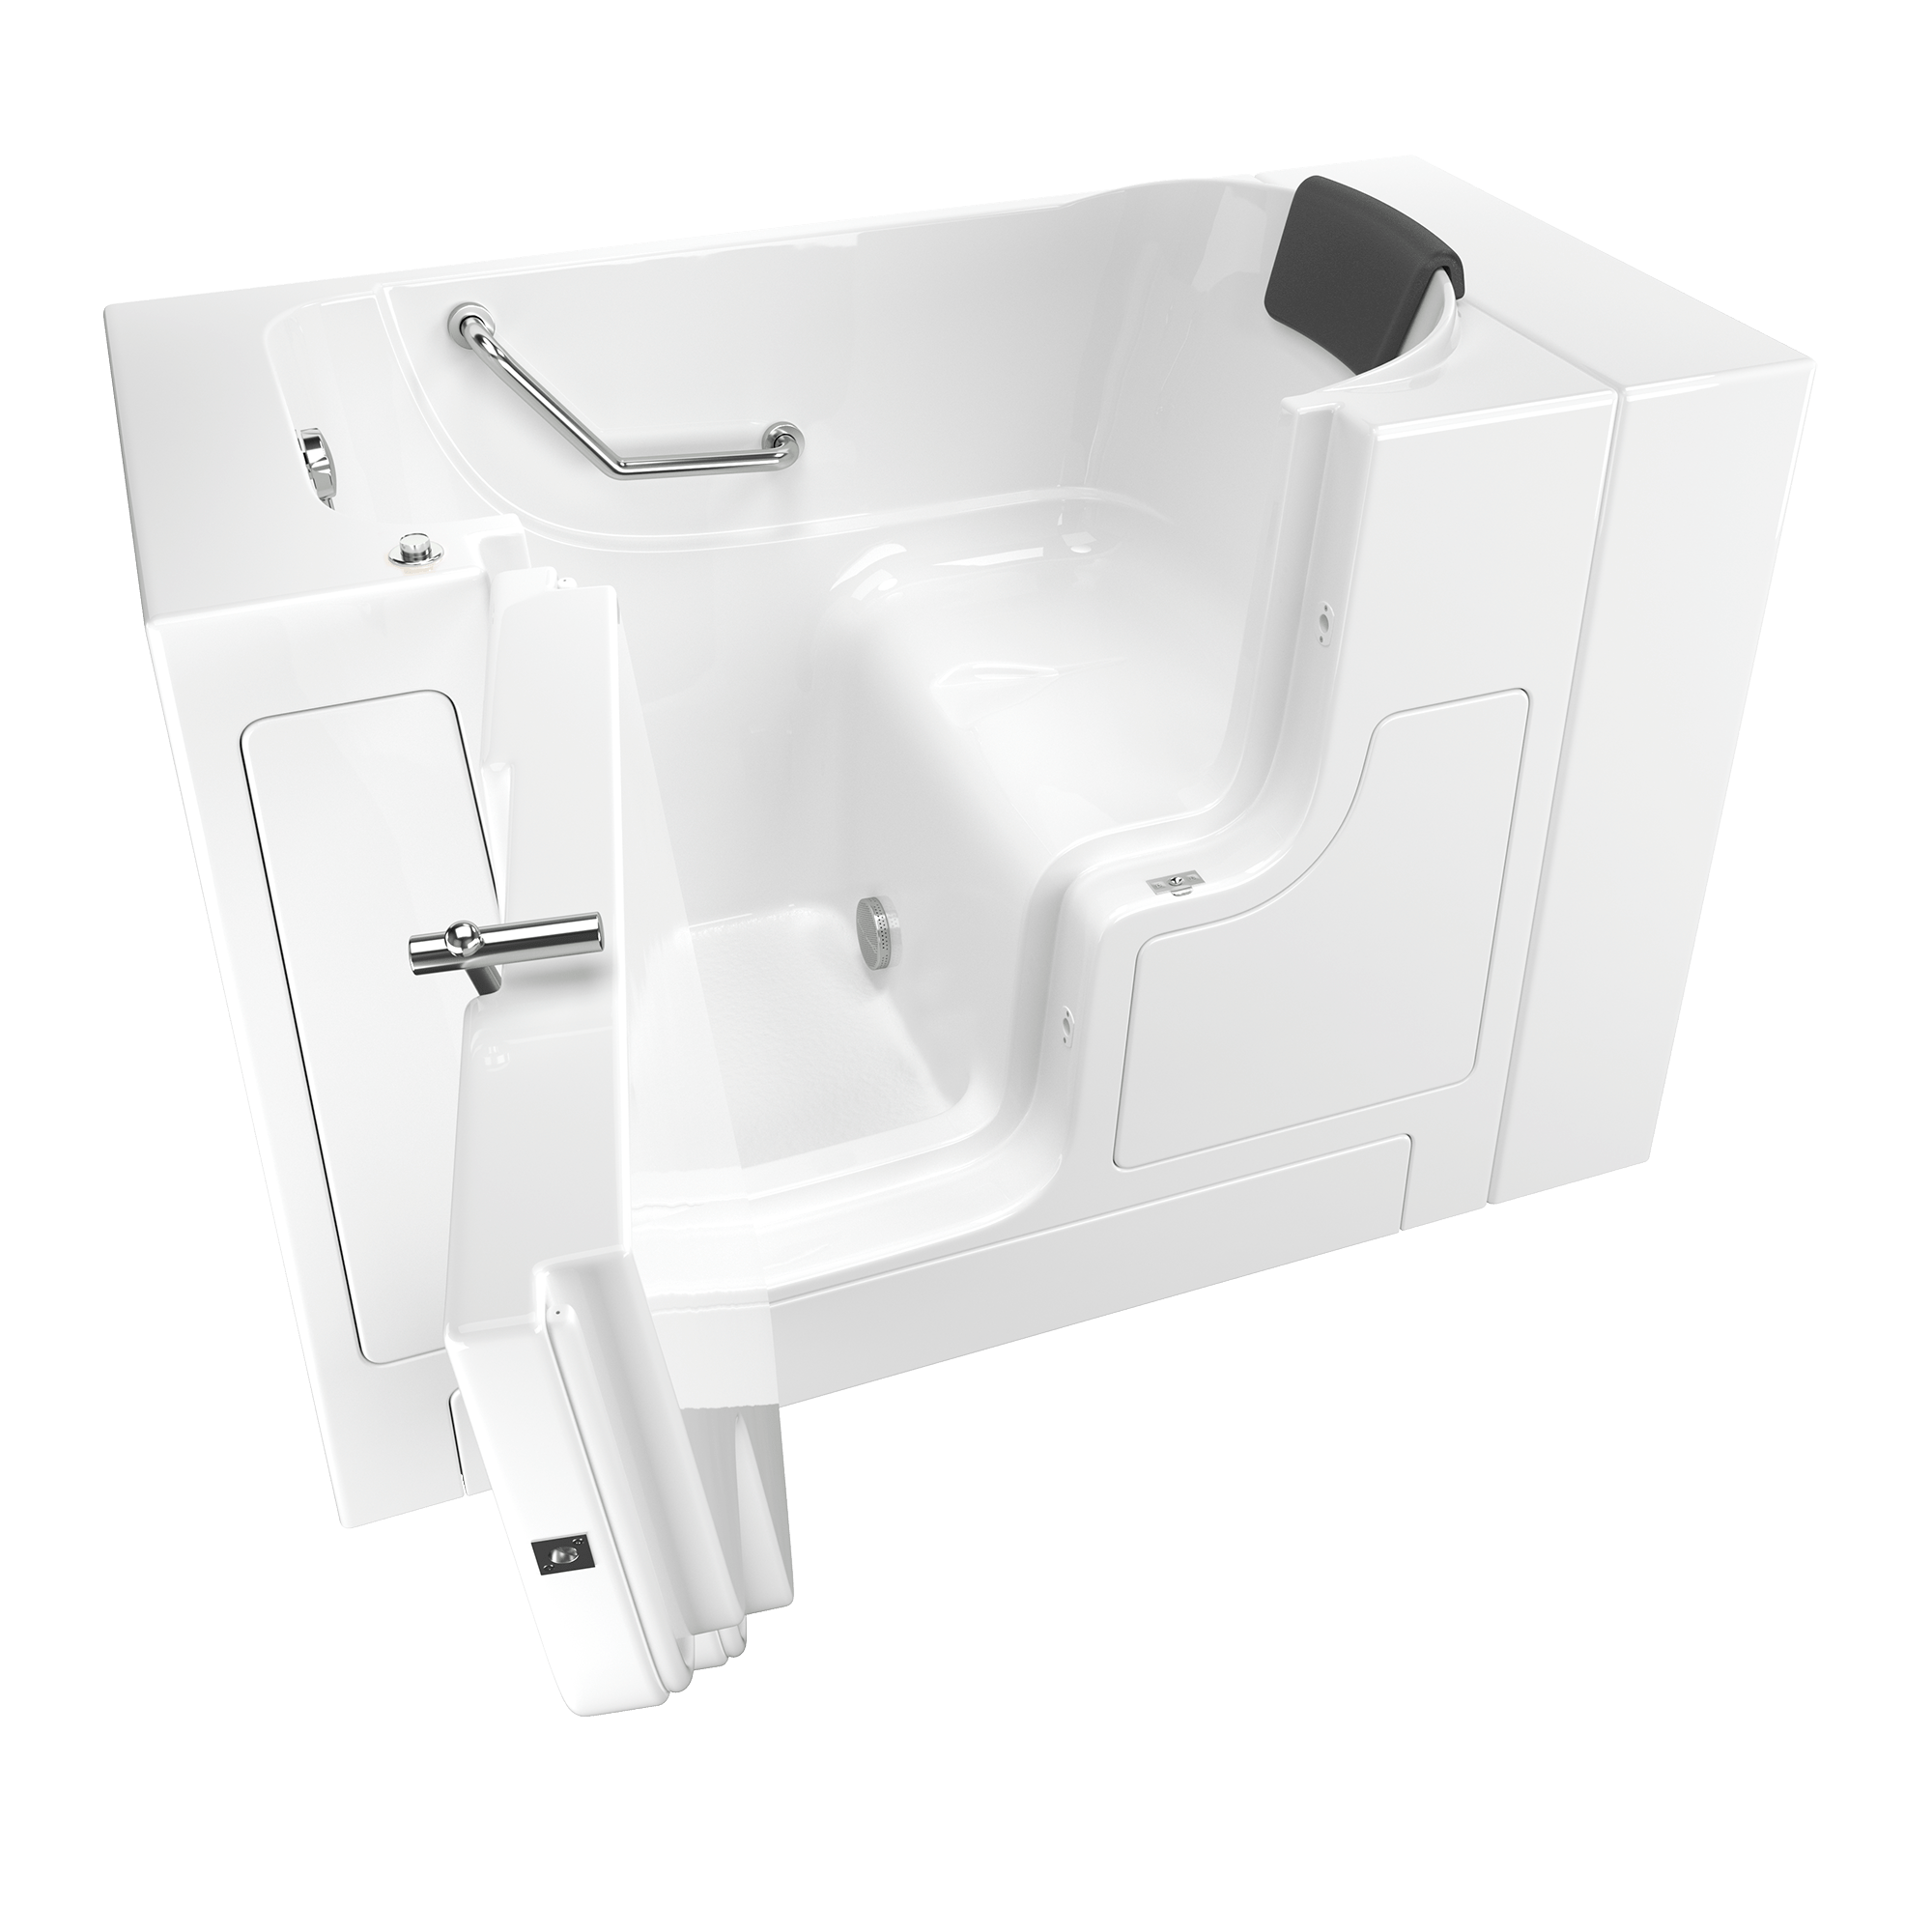 Gelcoat Premium Series 30 x 52  Inch Walk in Tub With Soaker System   Left Hand Drain WIB WHITE